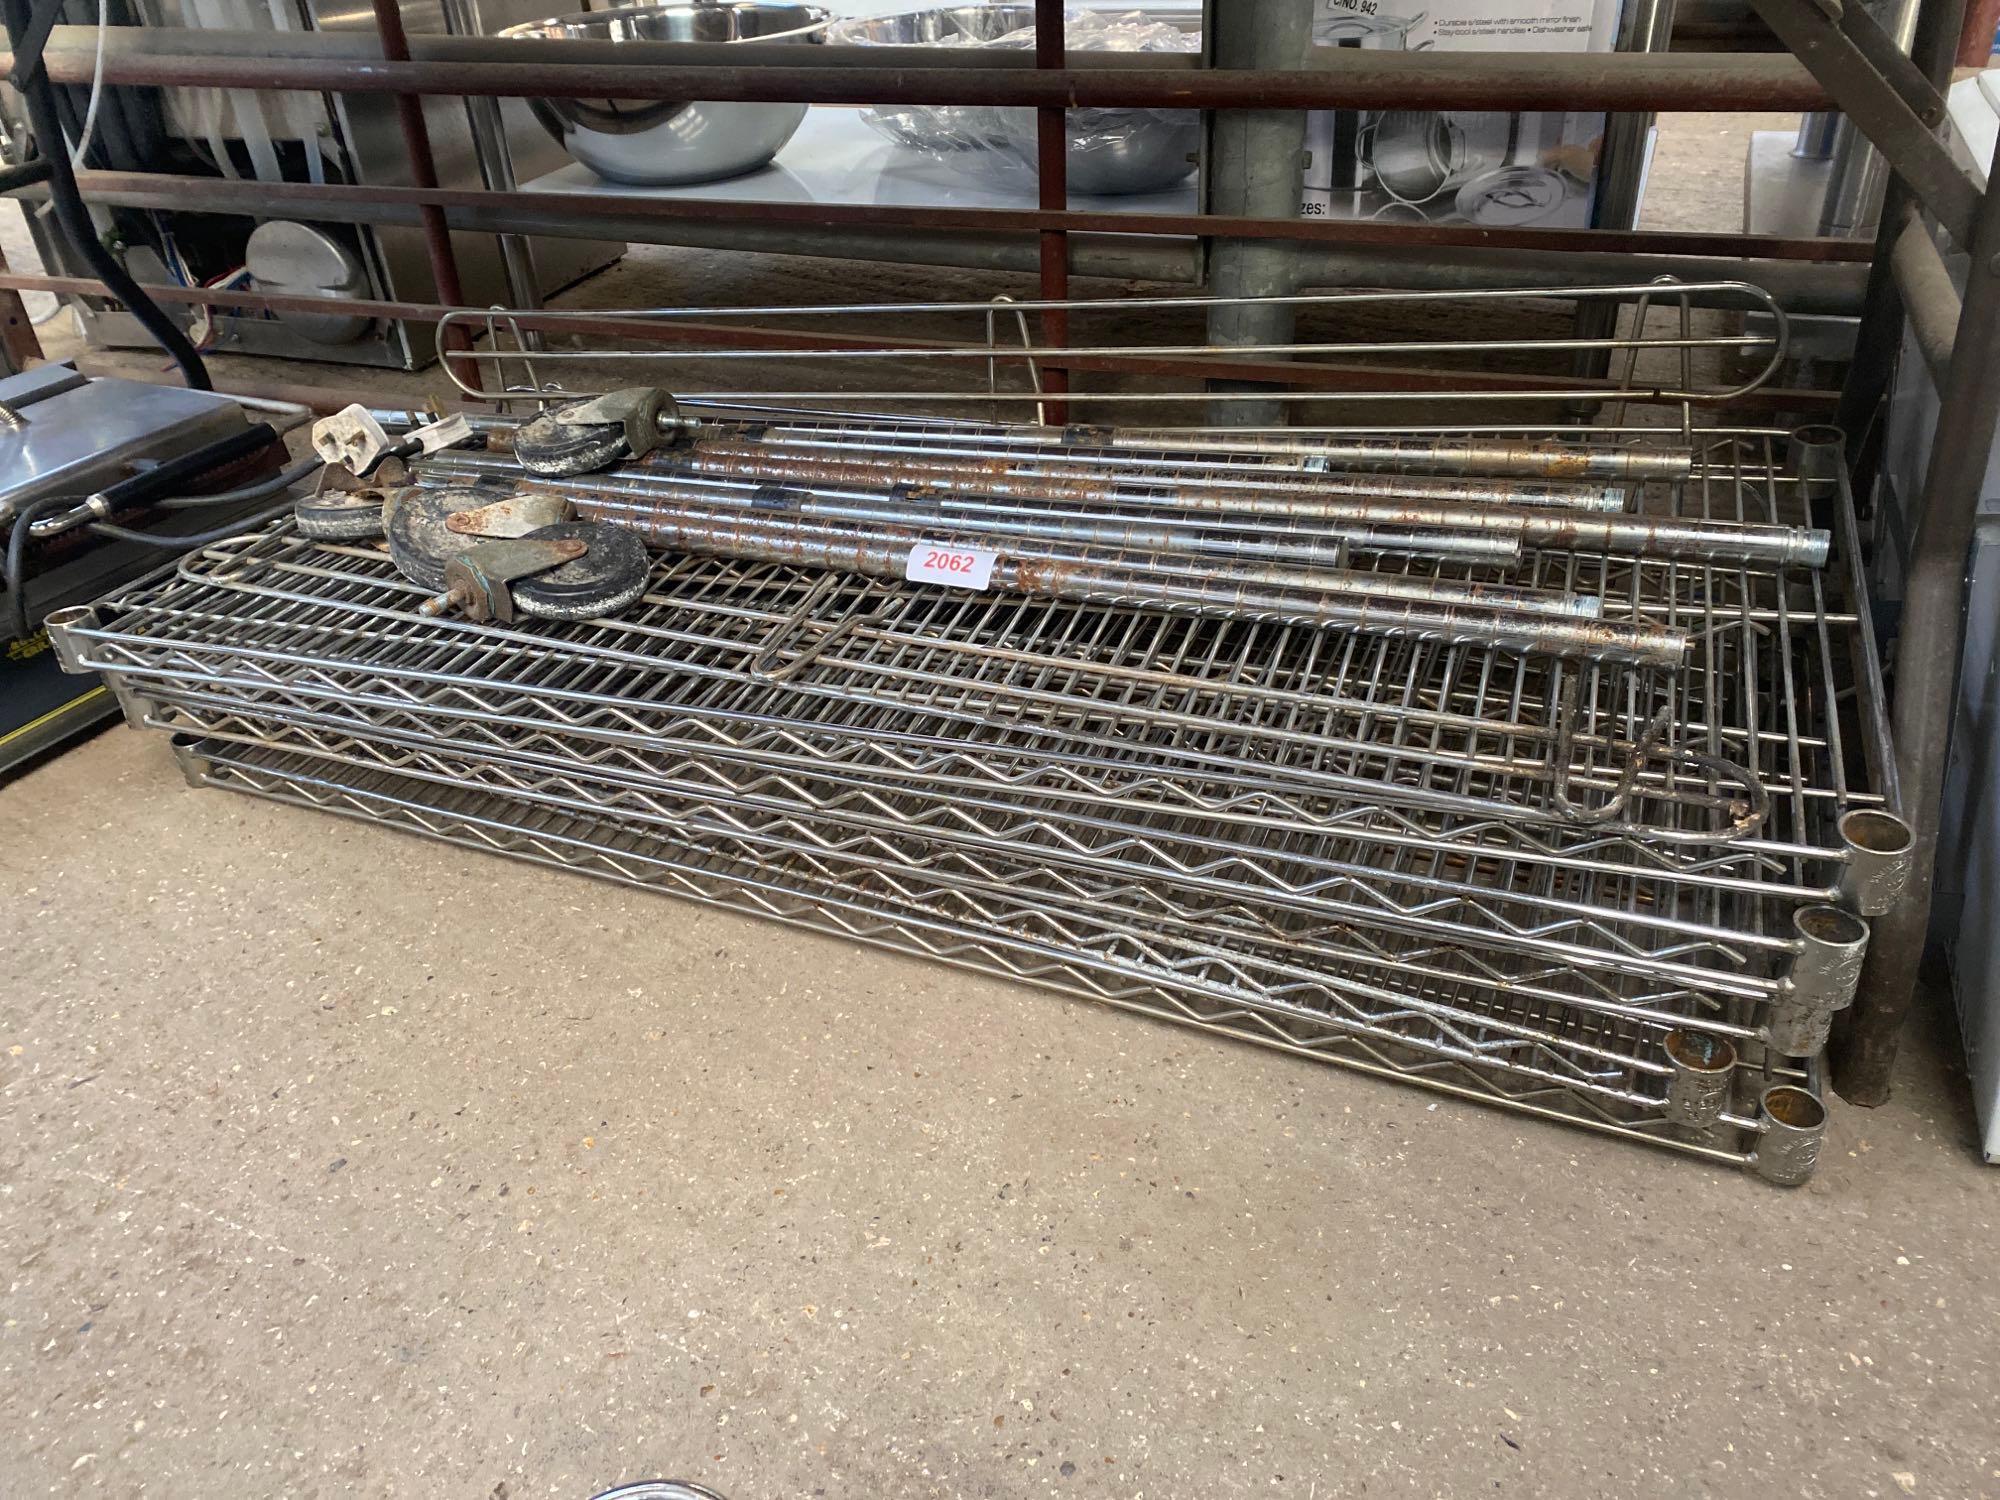 Quantity of stainless steel shelving